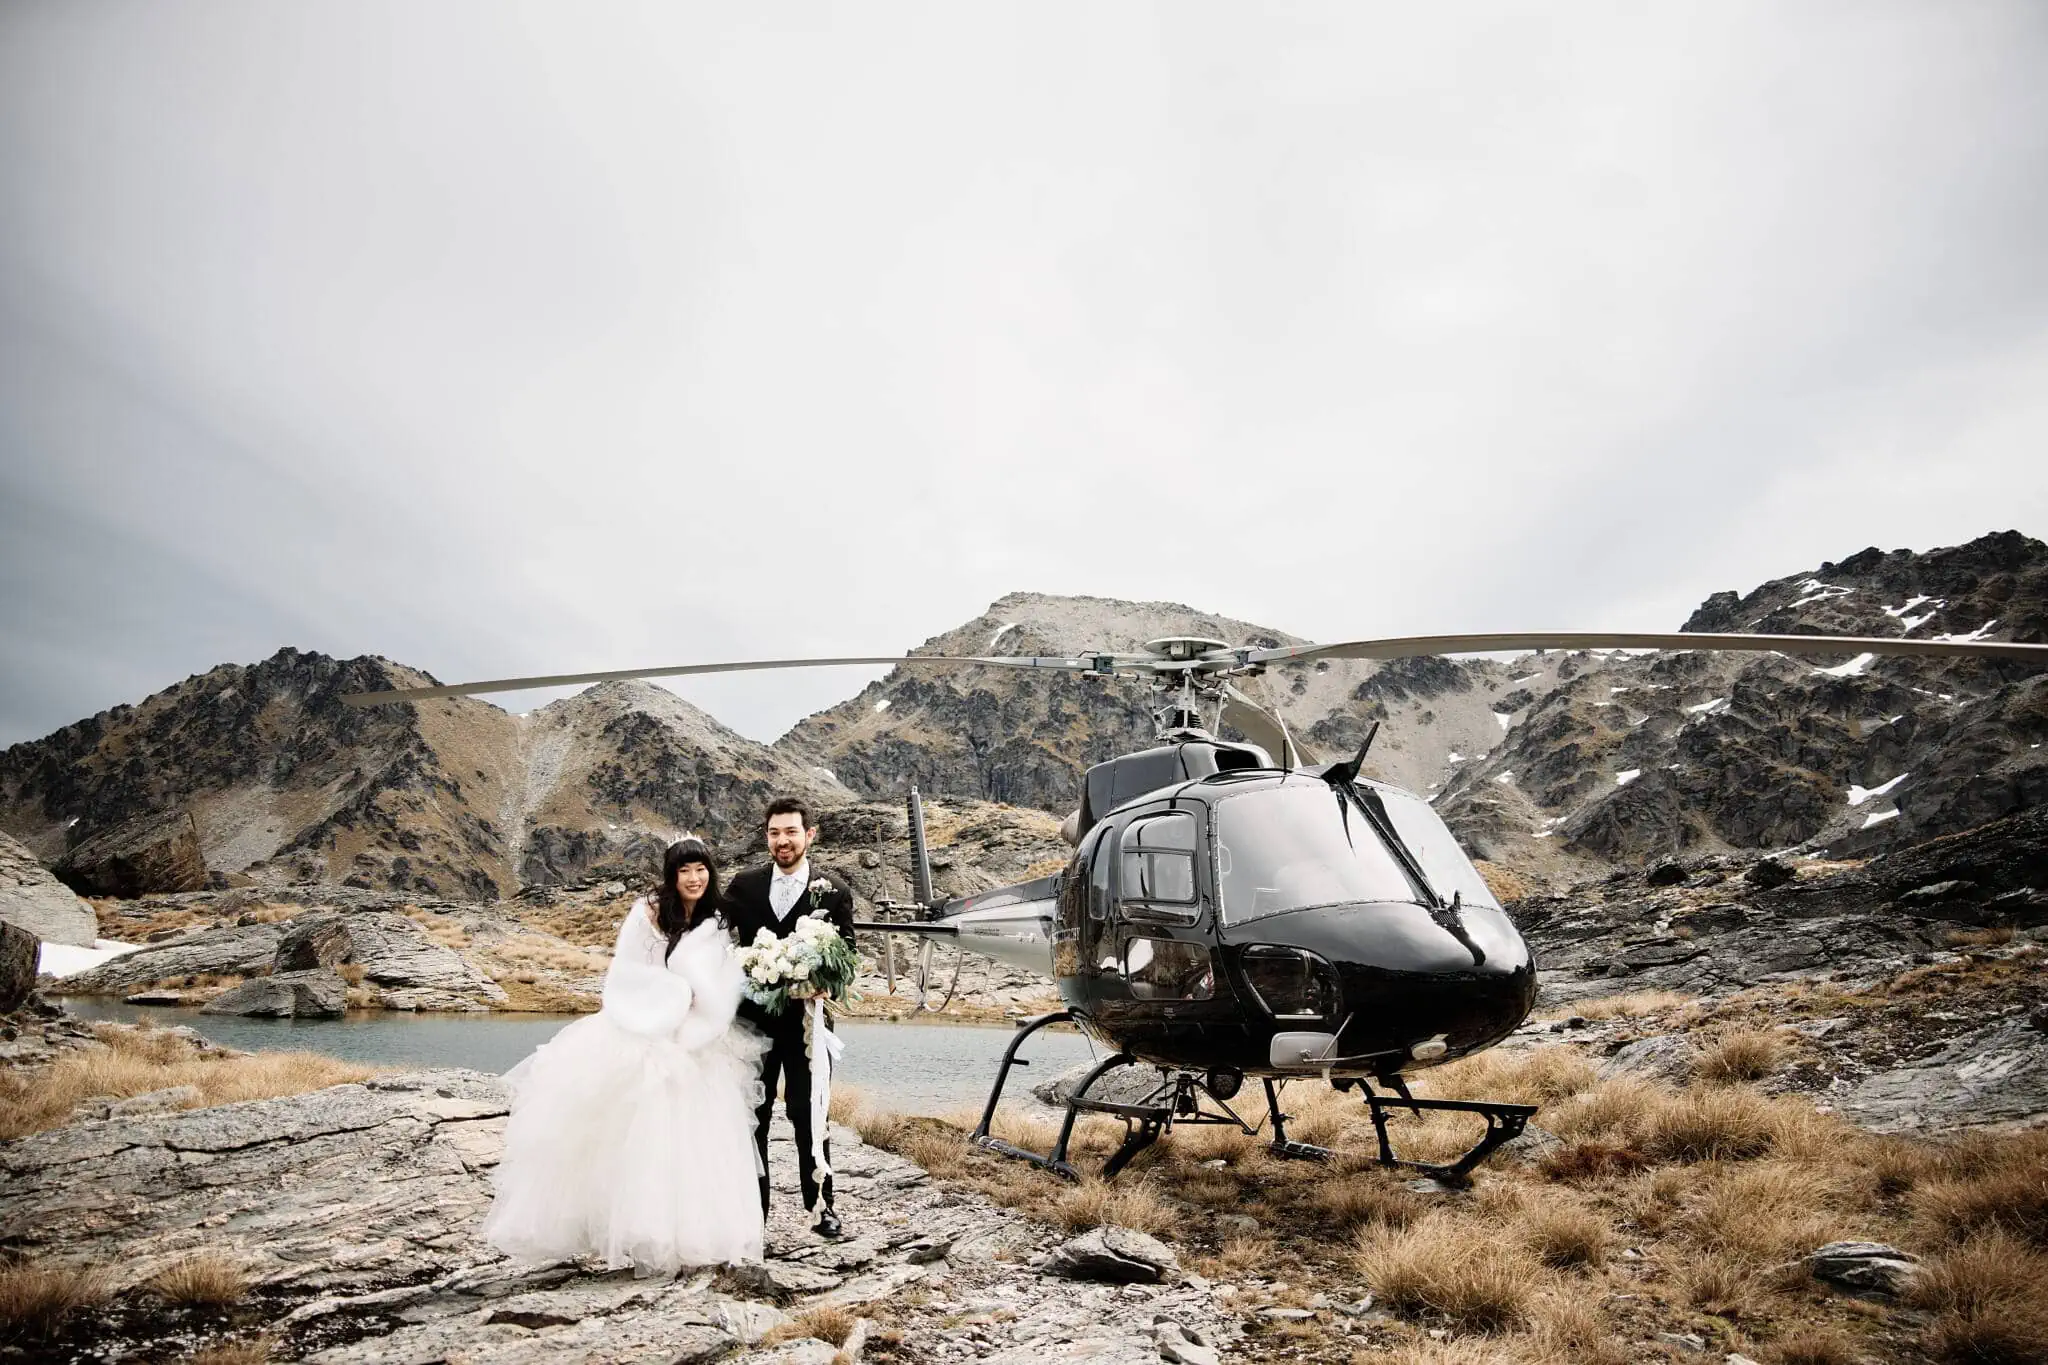 Carlos and Wanzhu's intimate elopement wedding, standing next to a helicopter in the mountains.